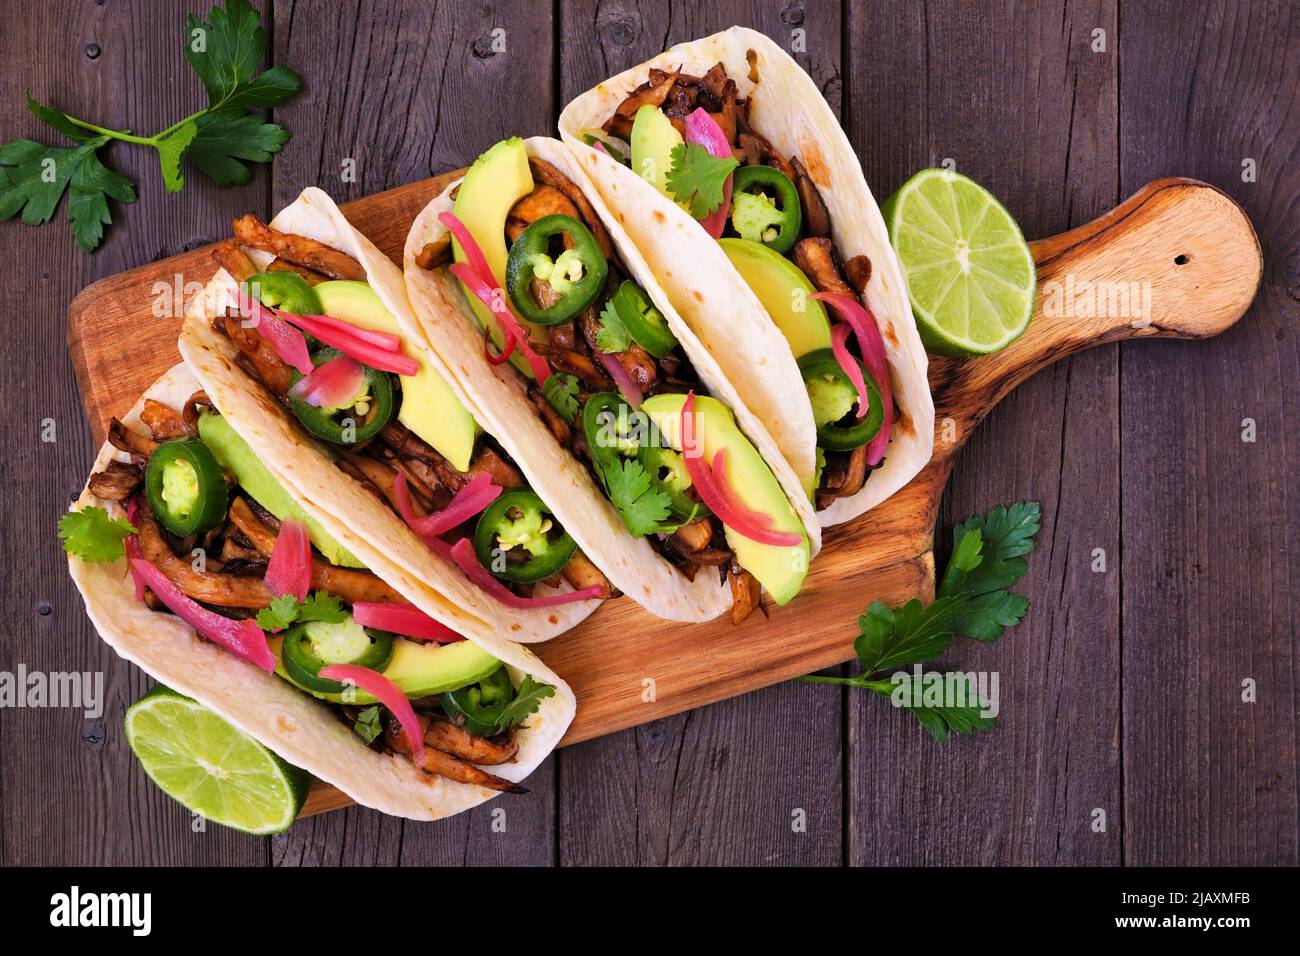 Vegan mushroom tacos. Serving board, above view on a dark wood background. Healthy eating, plant based meat substitute concept. Stock Photo